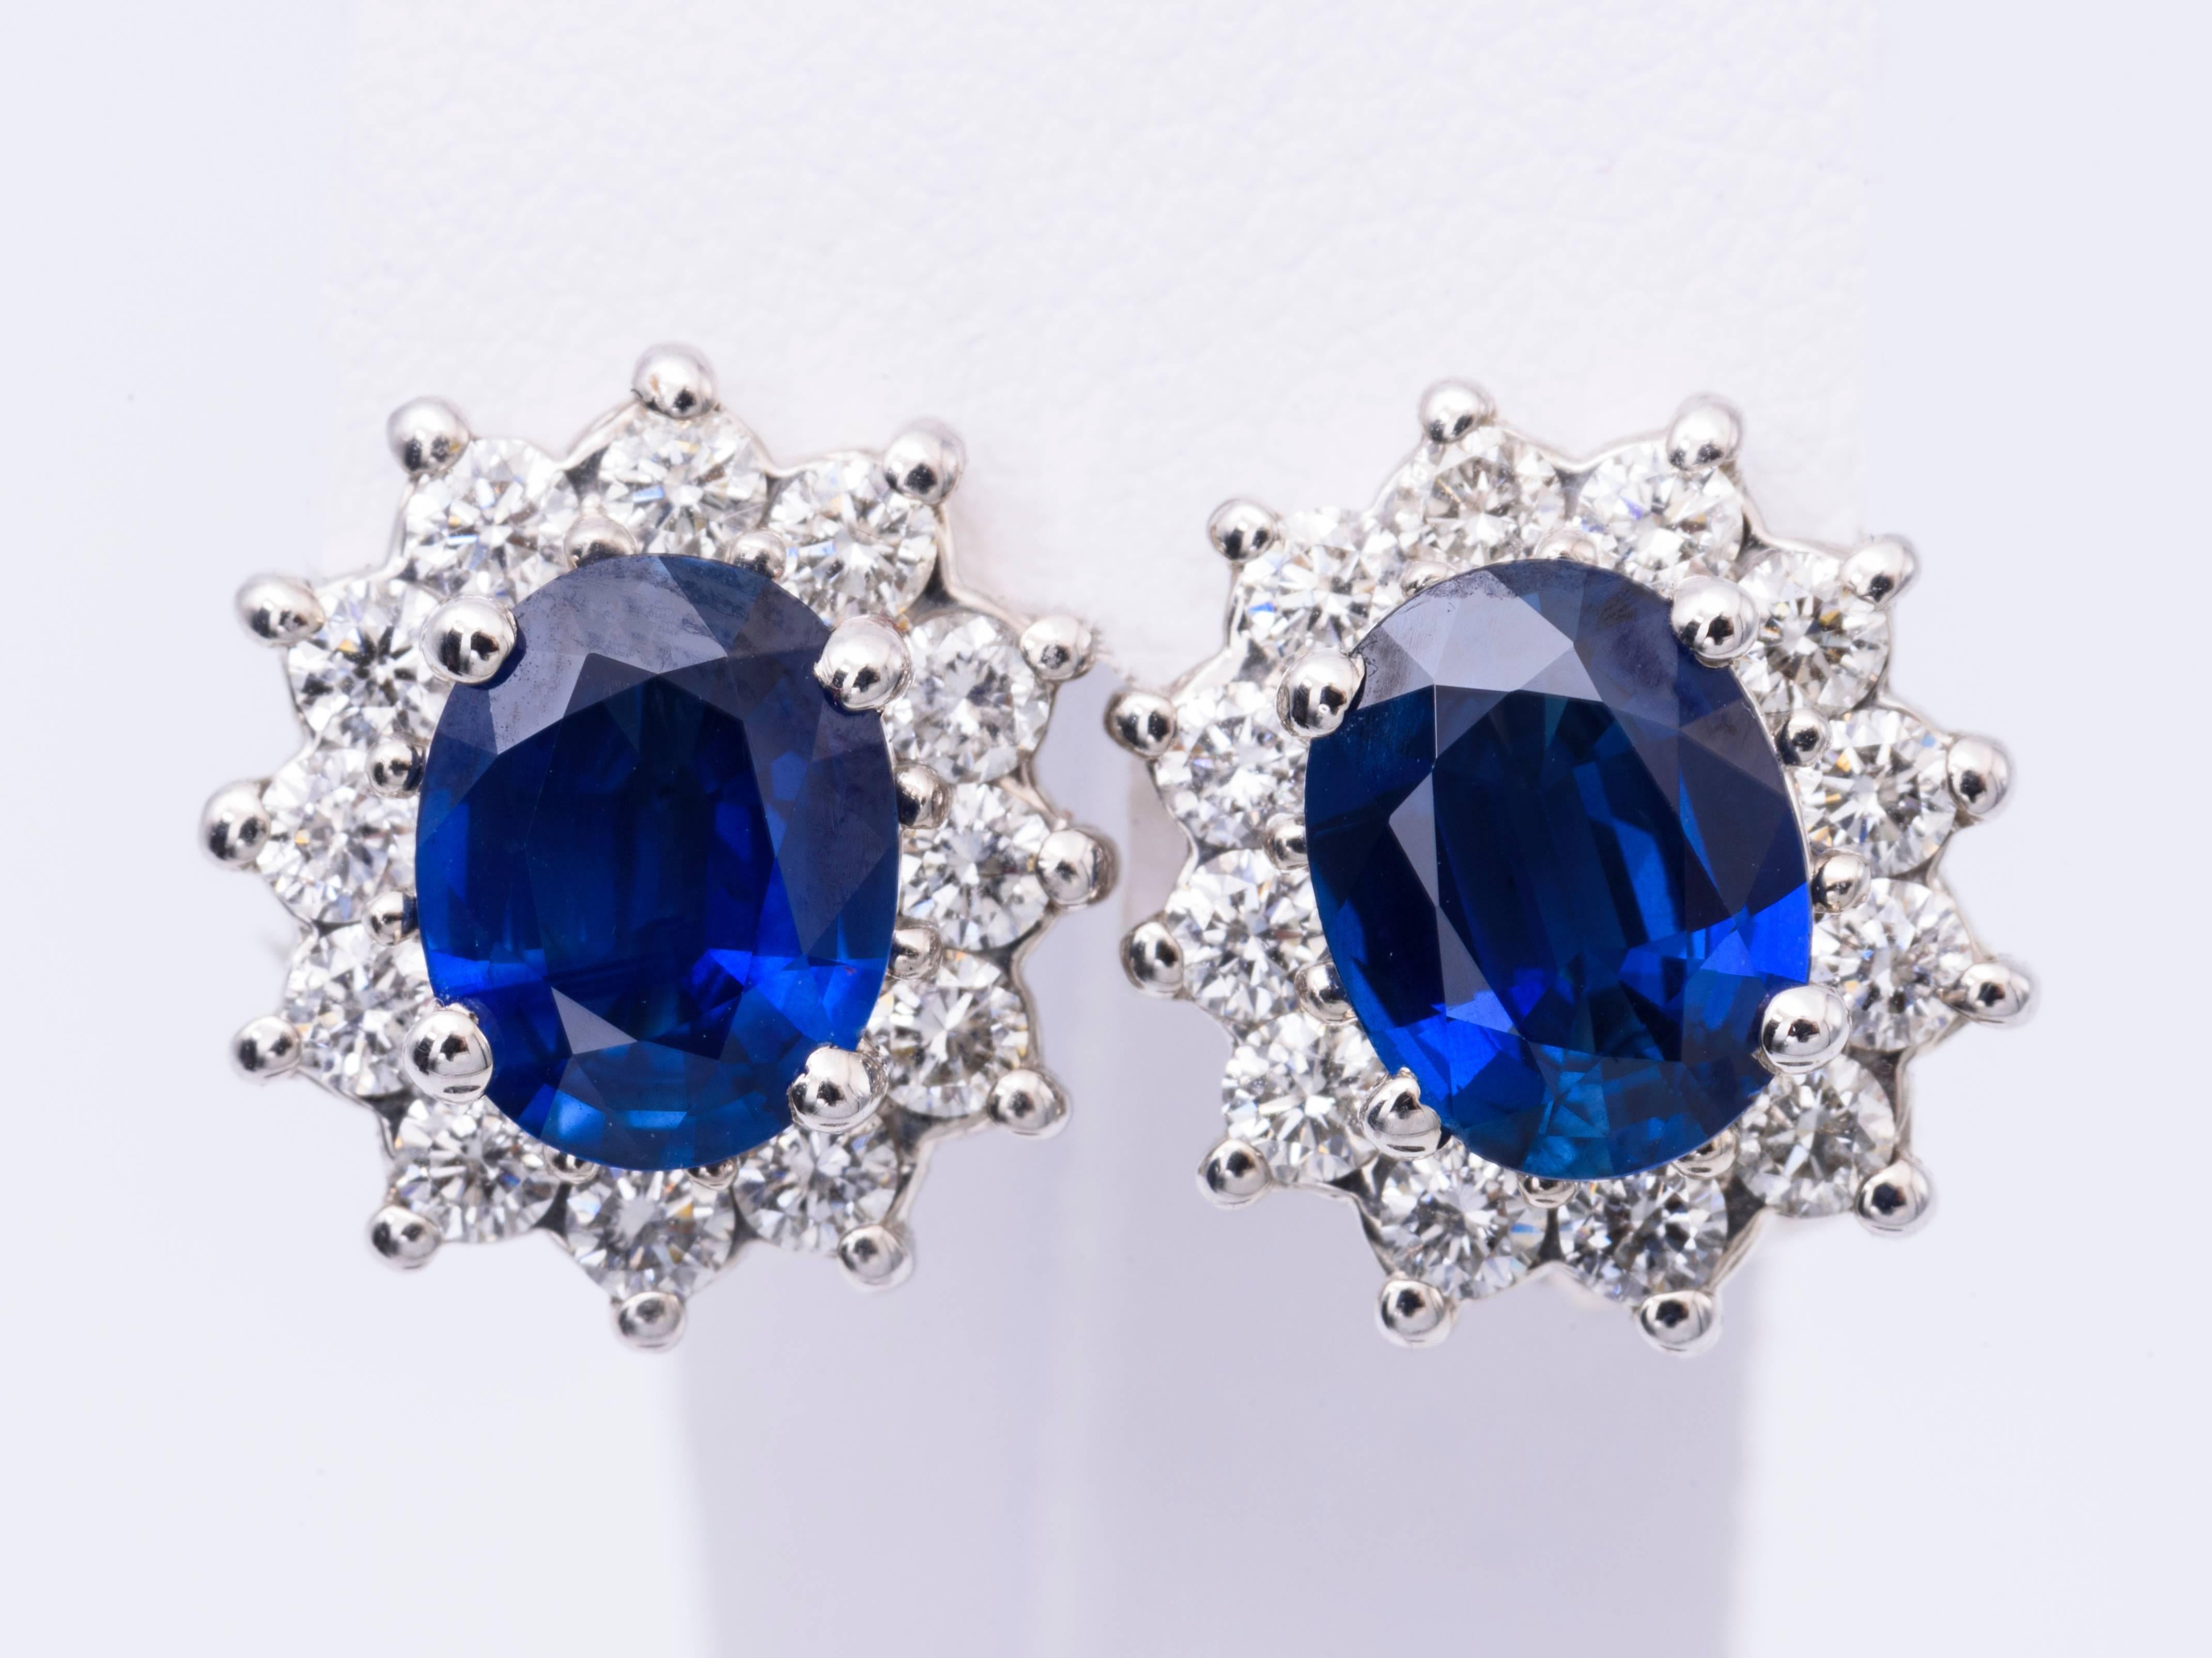 The oval sapphire in these earrings have a total carat weight of 3.84 carats, and they measure 9x7  MM.. The diamonds have a total carat weight of 1.40 carats.
The diamonds are H color and clarity is SI2.
The sapphire is  very bright and nice.
The